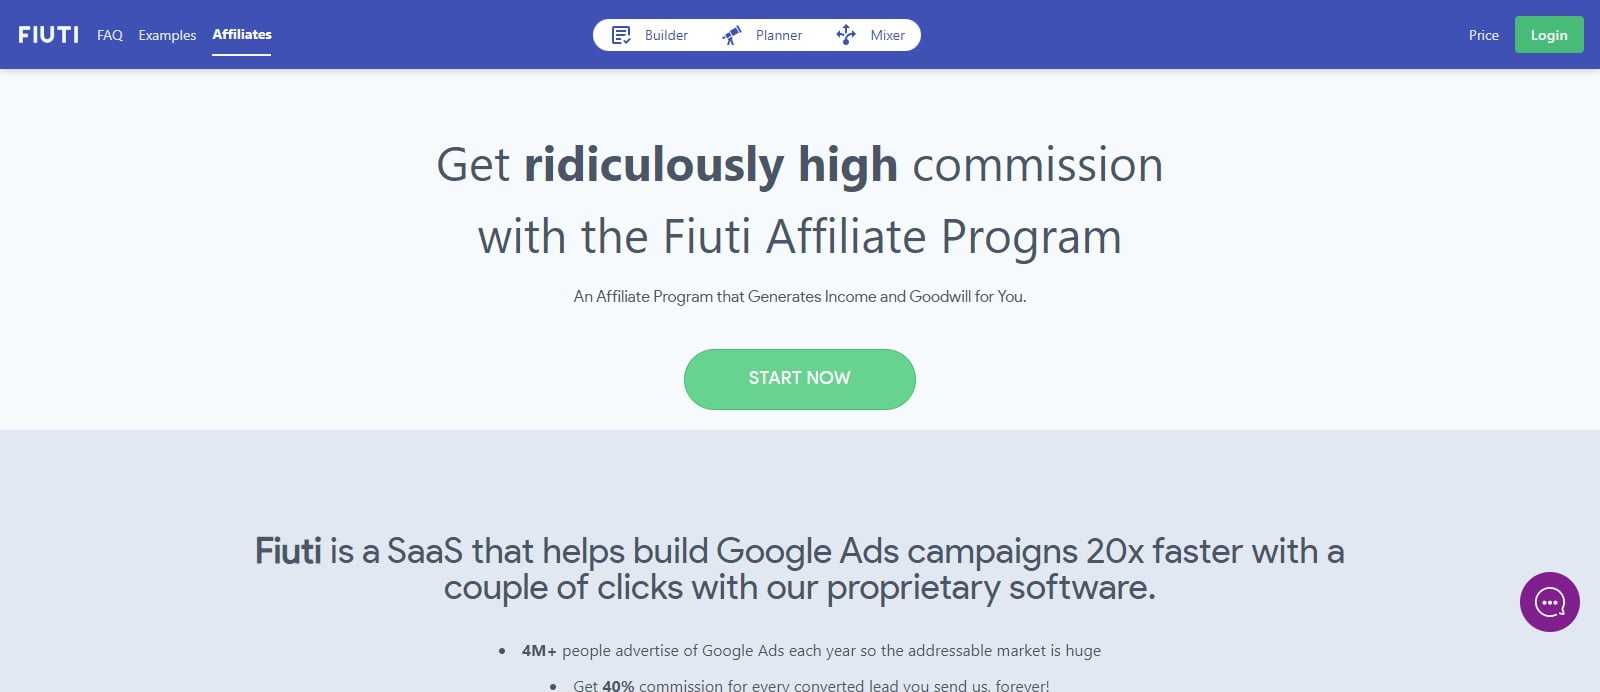 Fiuti Affiliates Program Review: 40% Recurring Commission on Each Sale